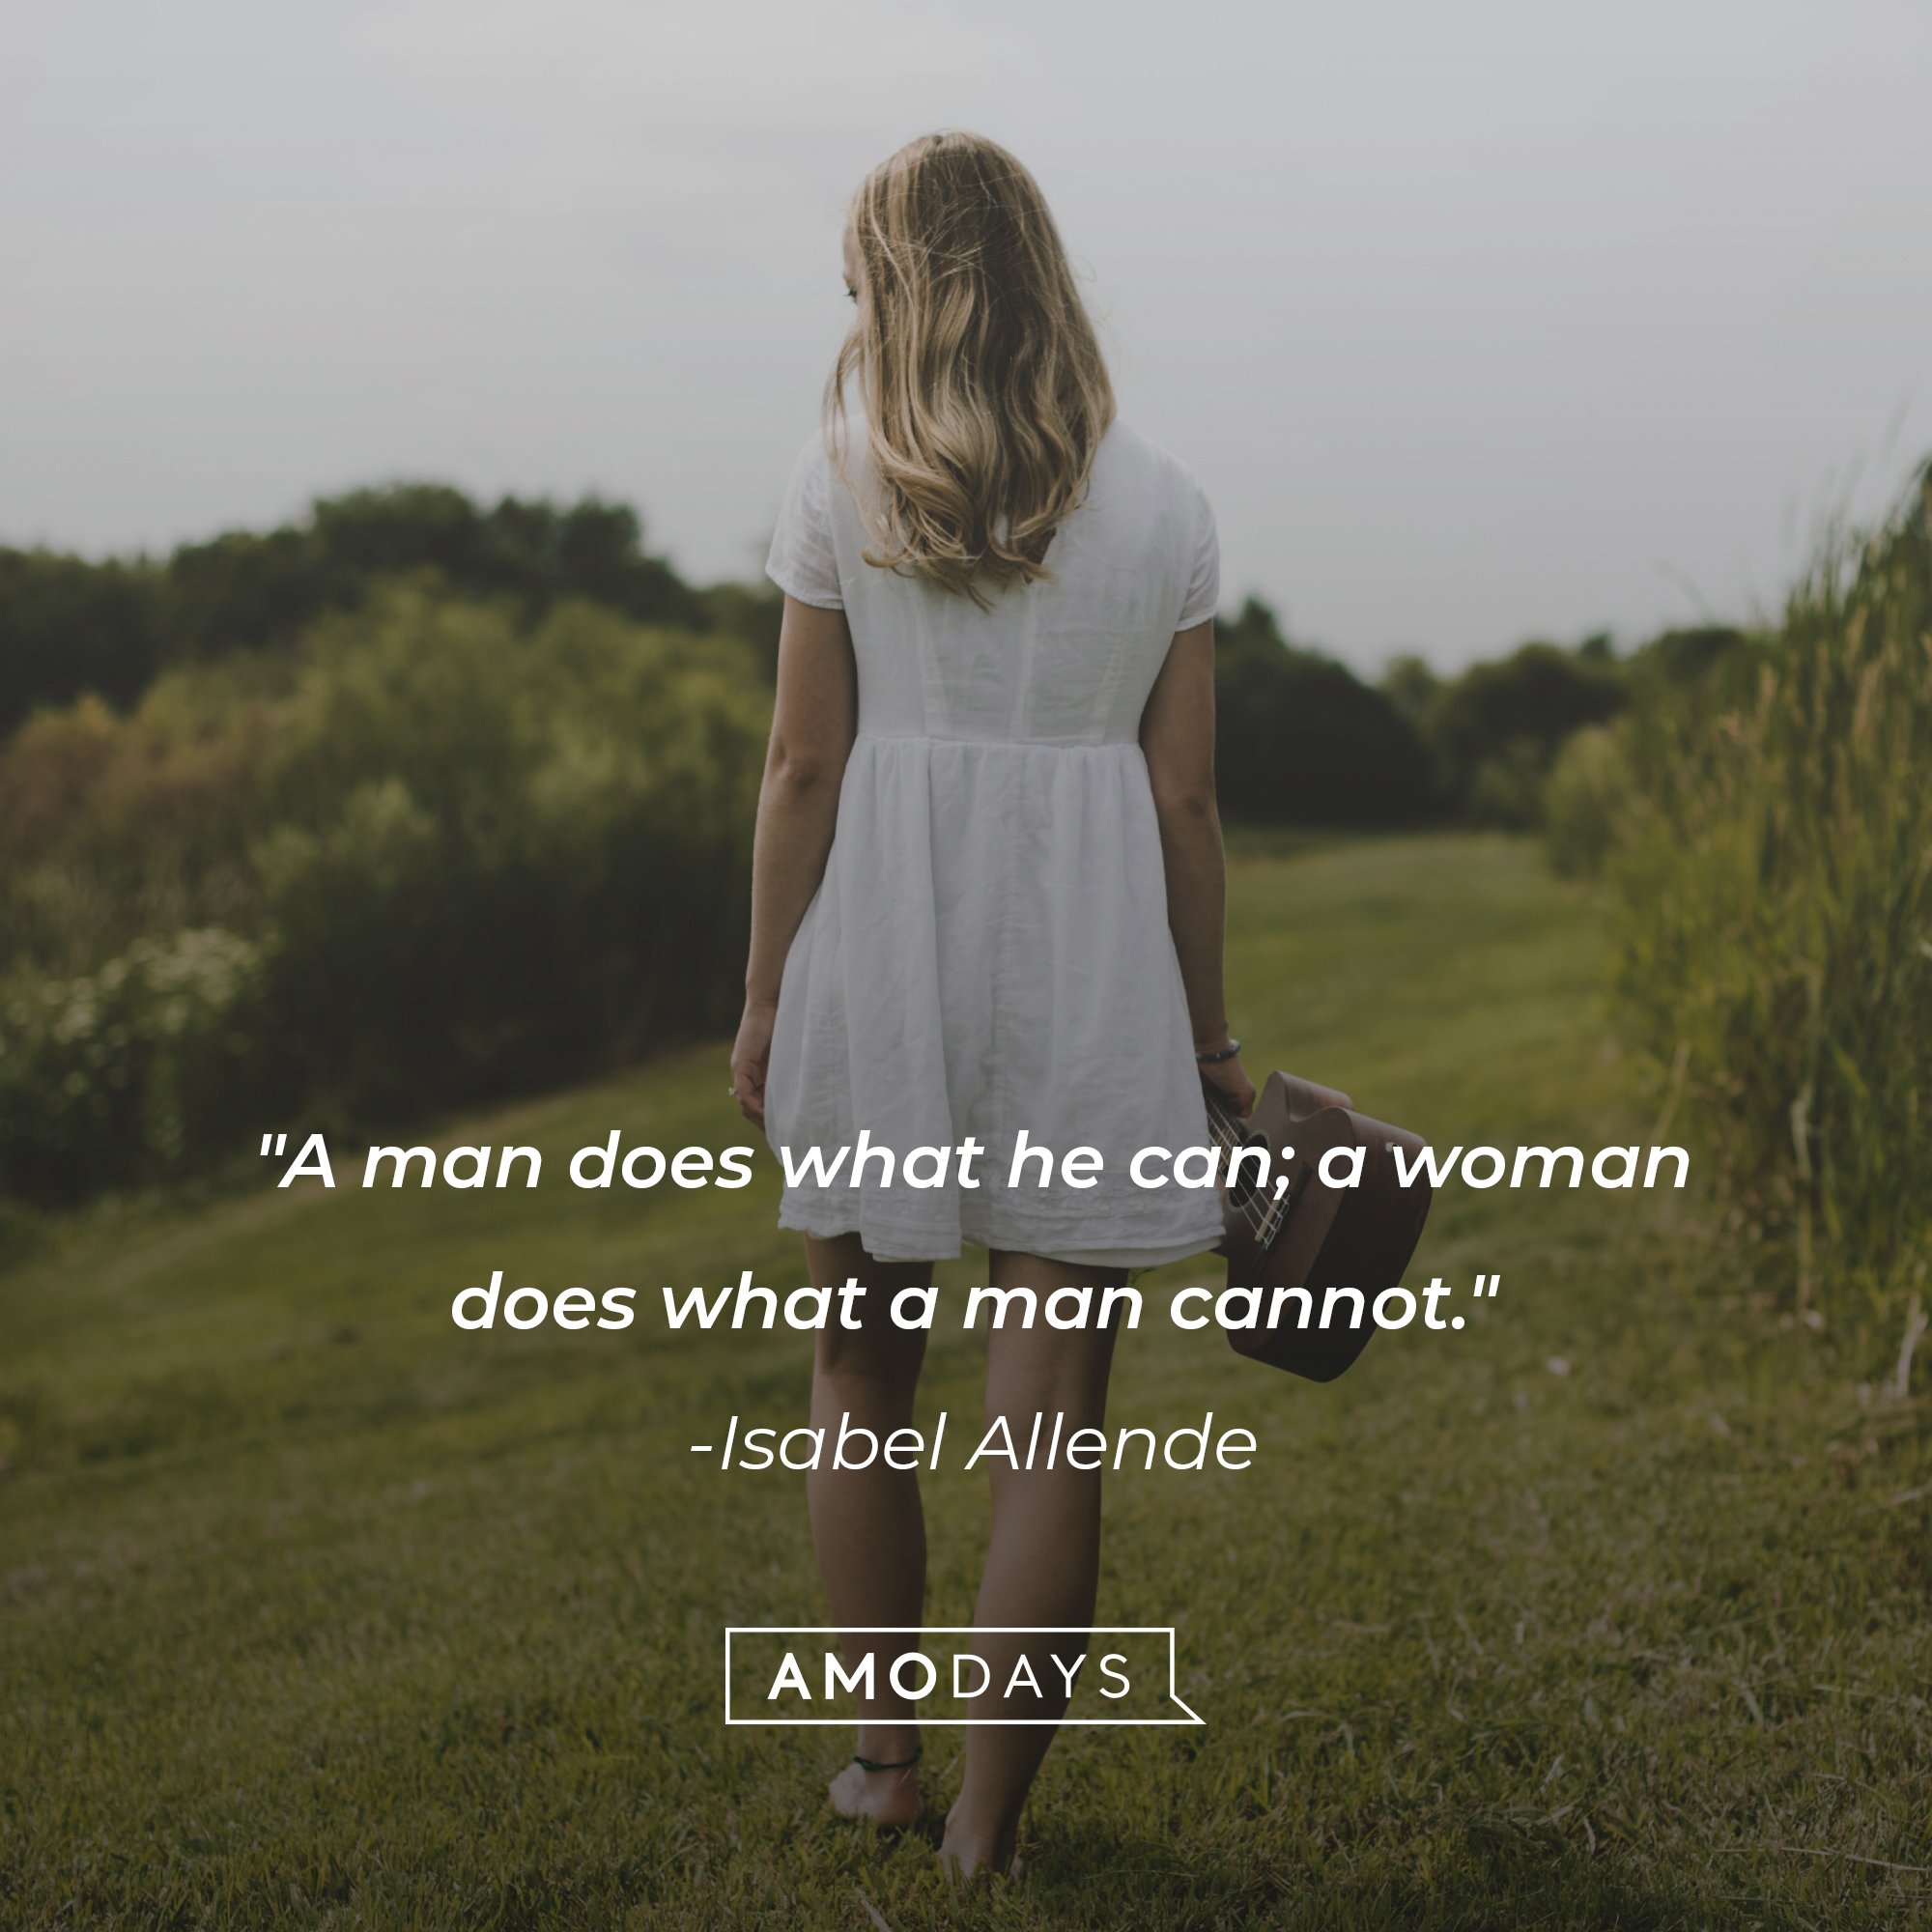  Isabel Allende’s quote: "A man does what he can; a woman does what a man cannot." | Image: AmoDays